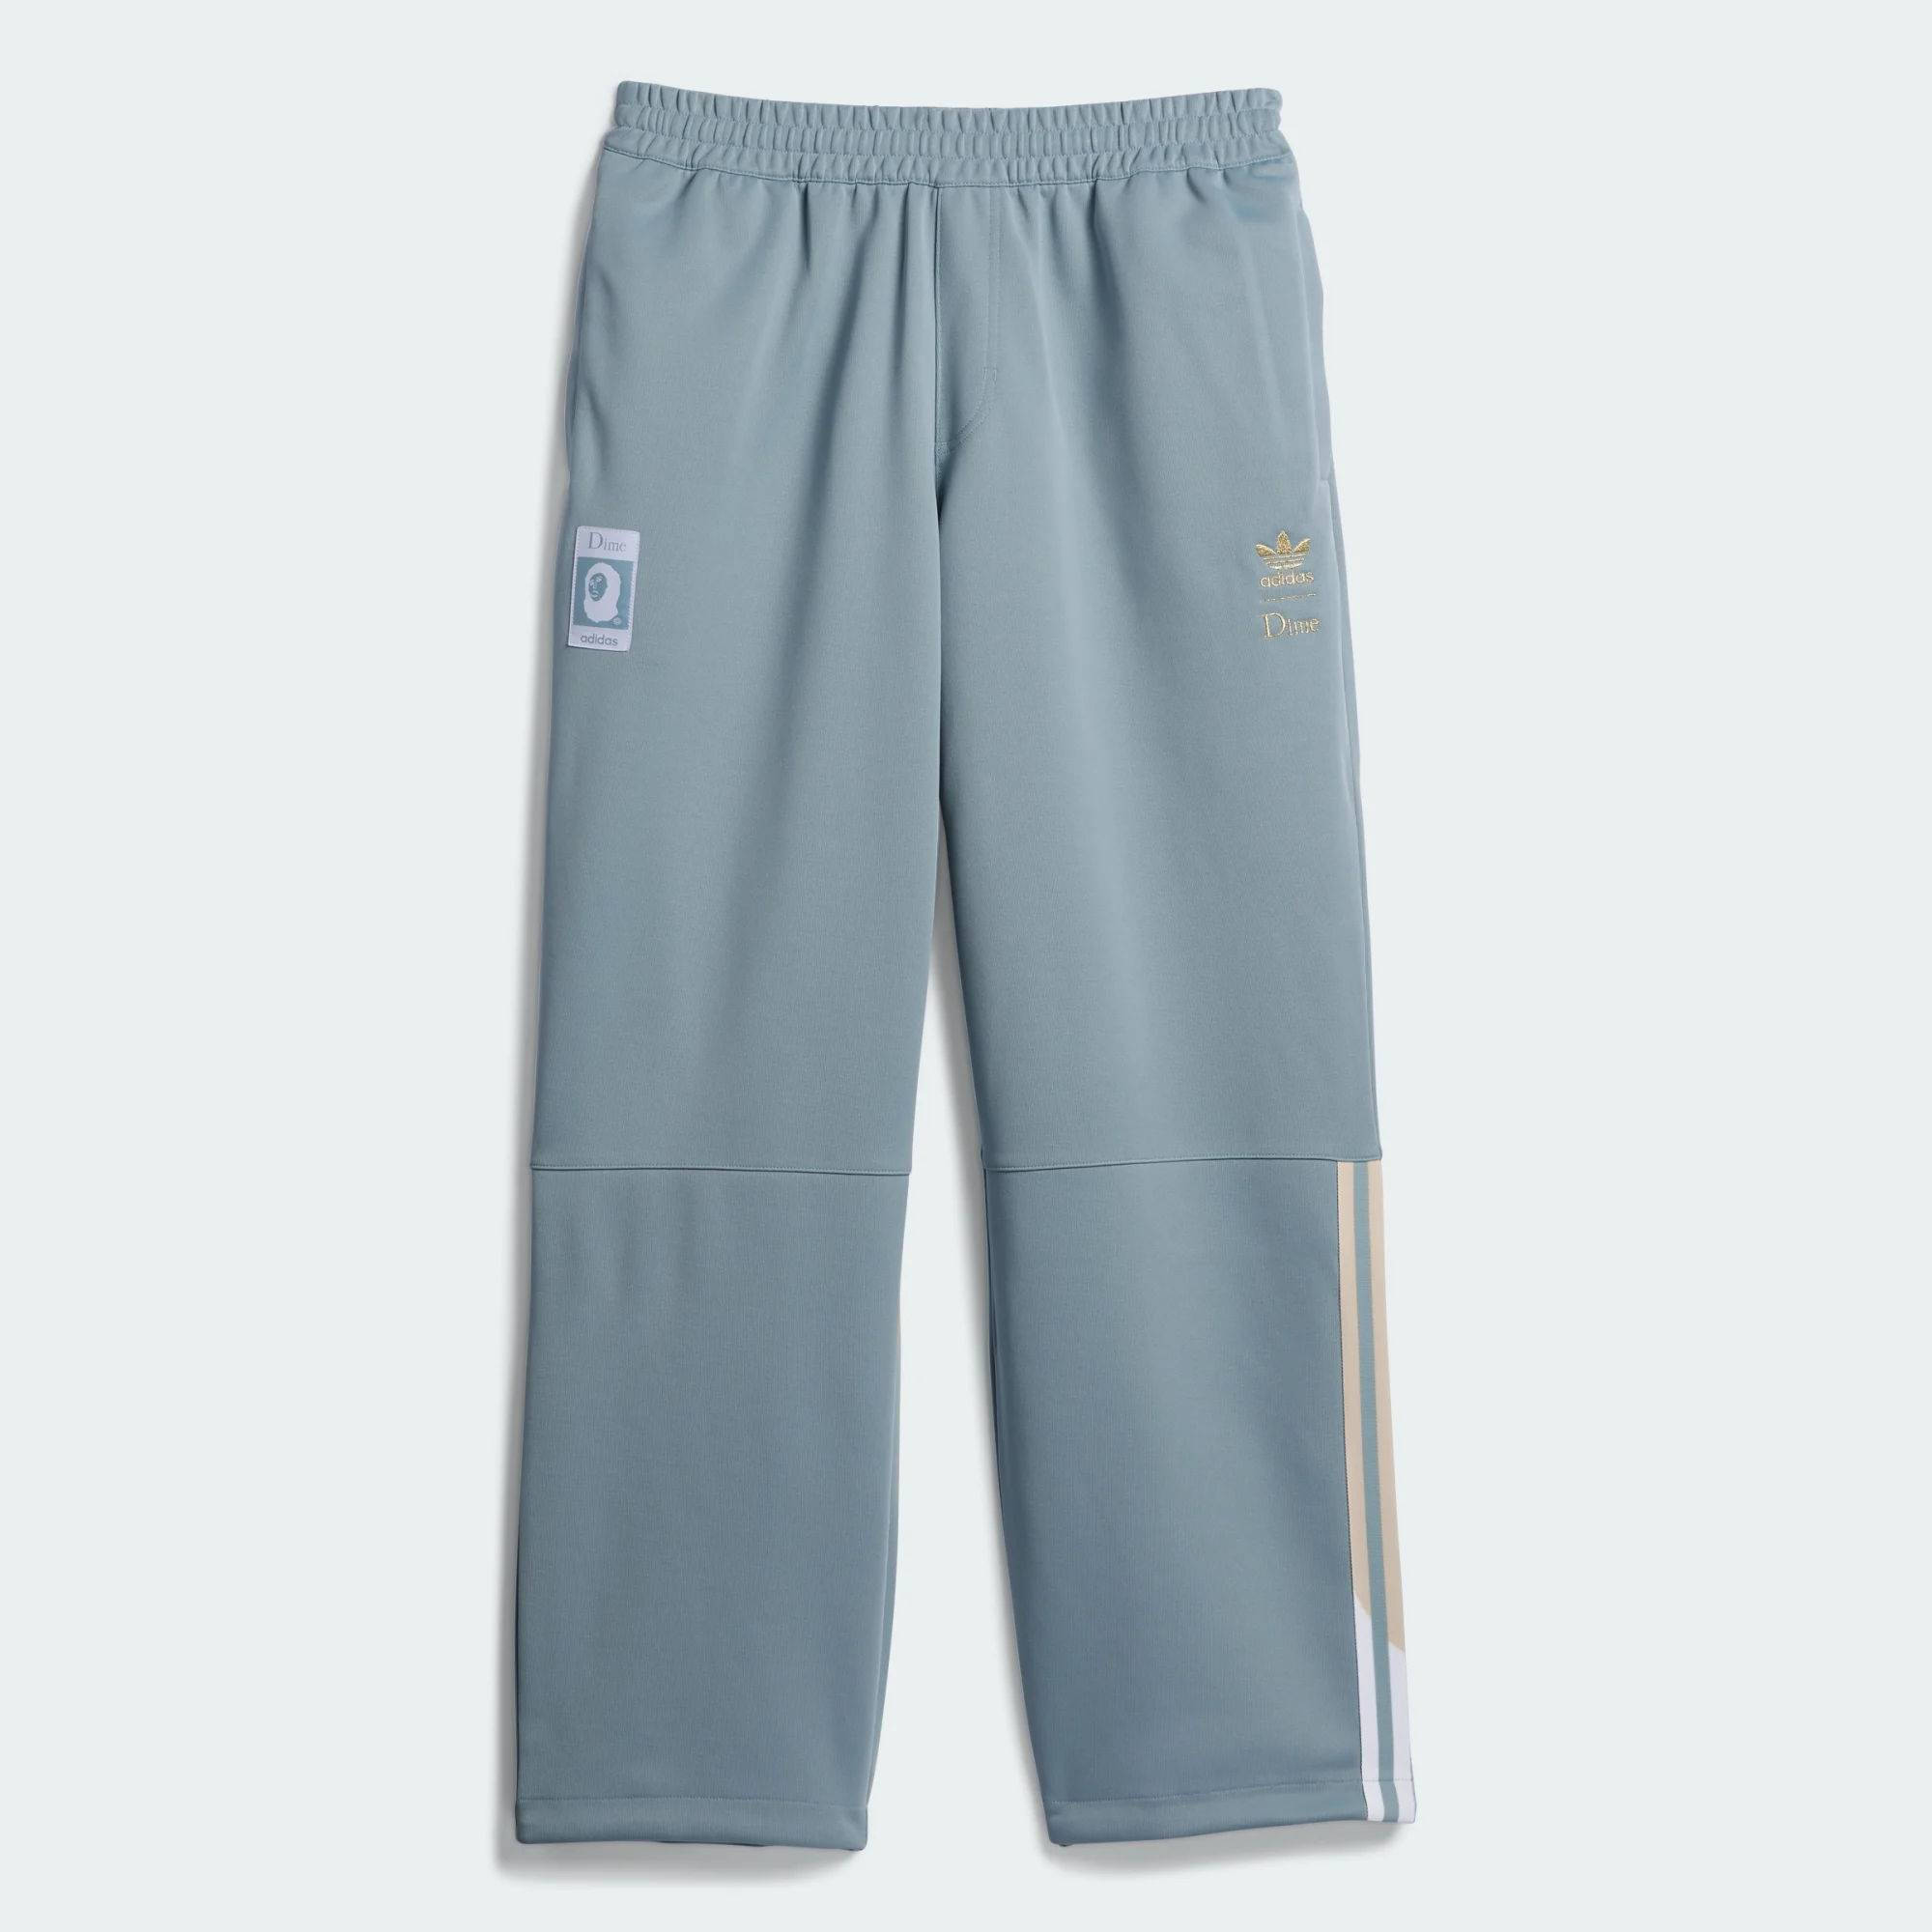 Dime x adidas Skate Superfire Trousers | Where To Buy | hz7252